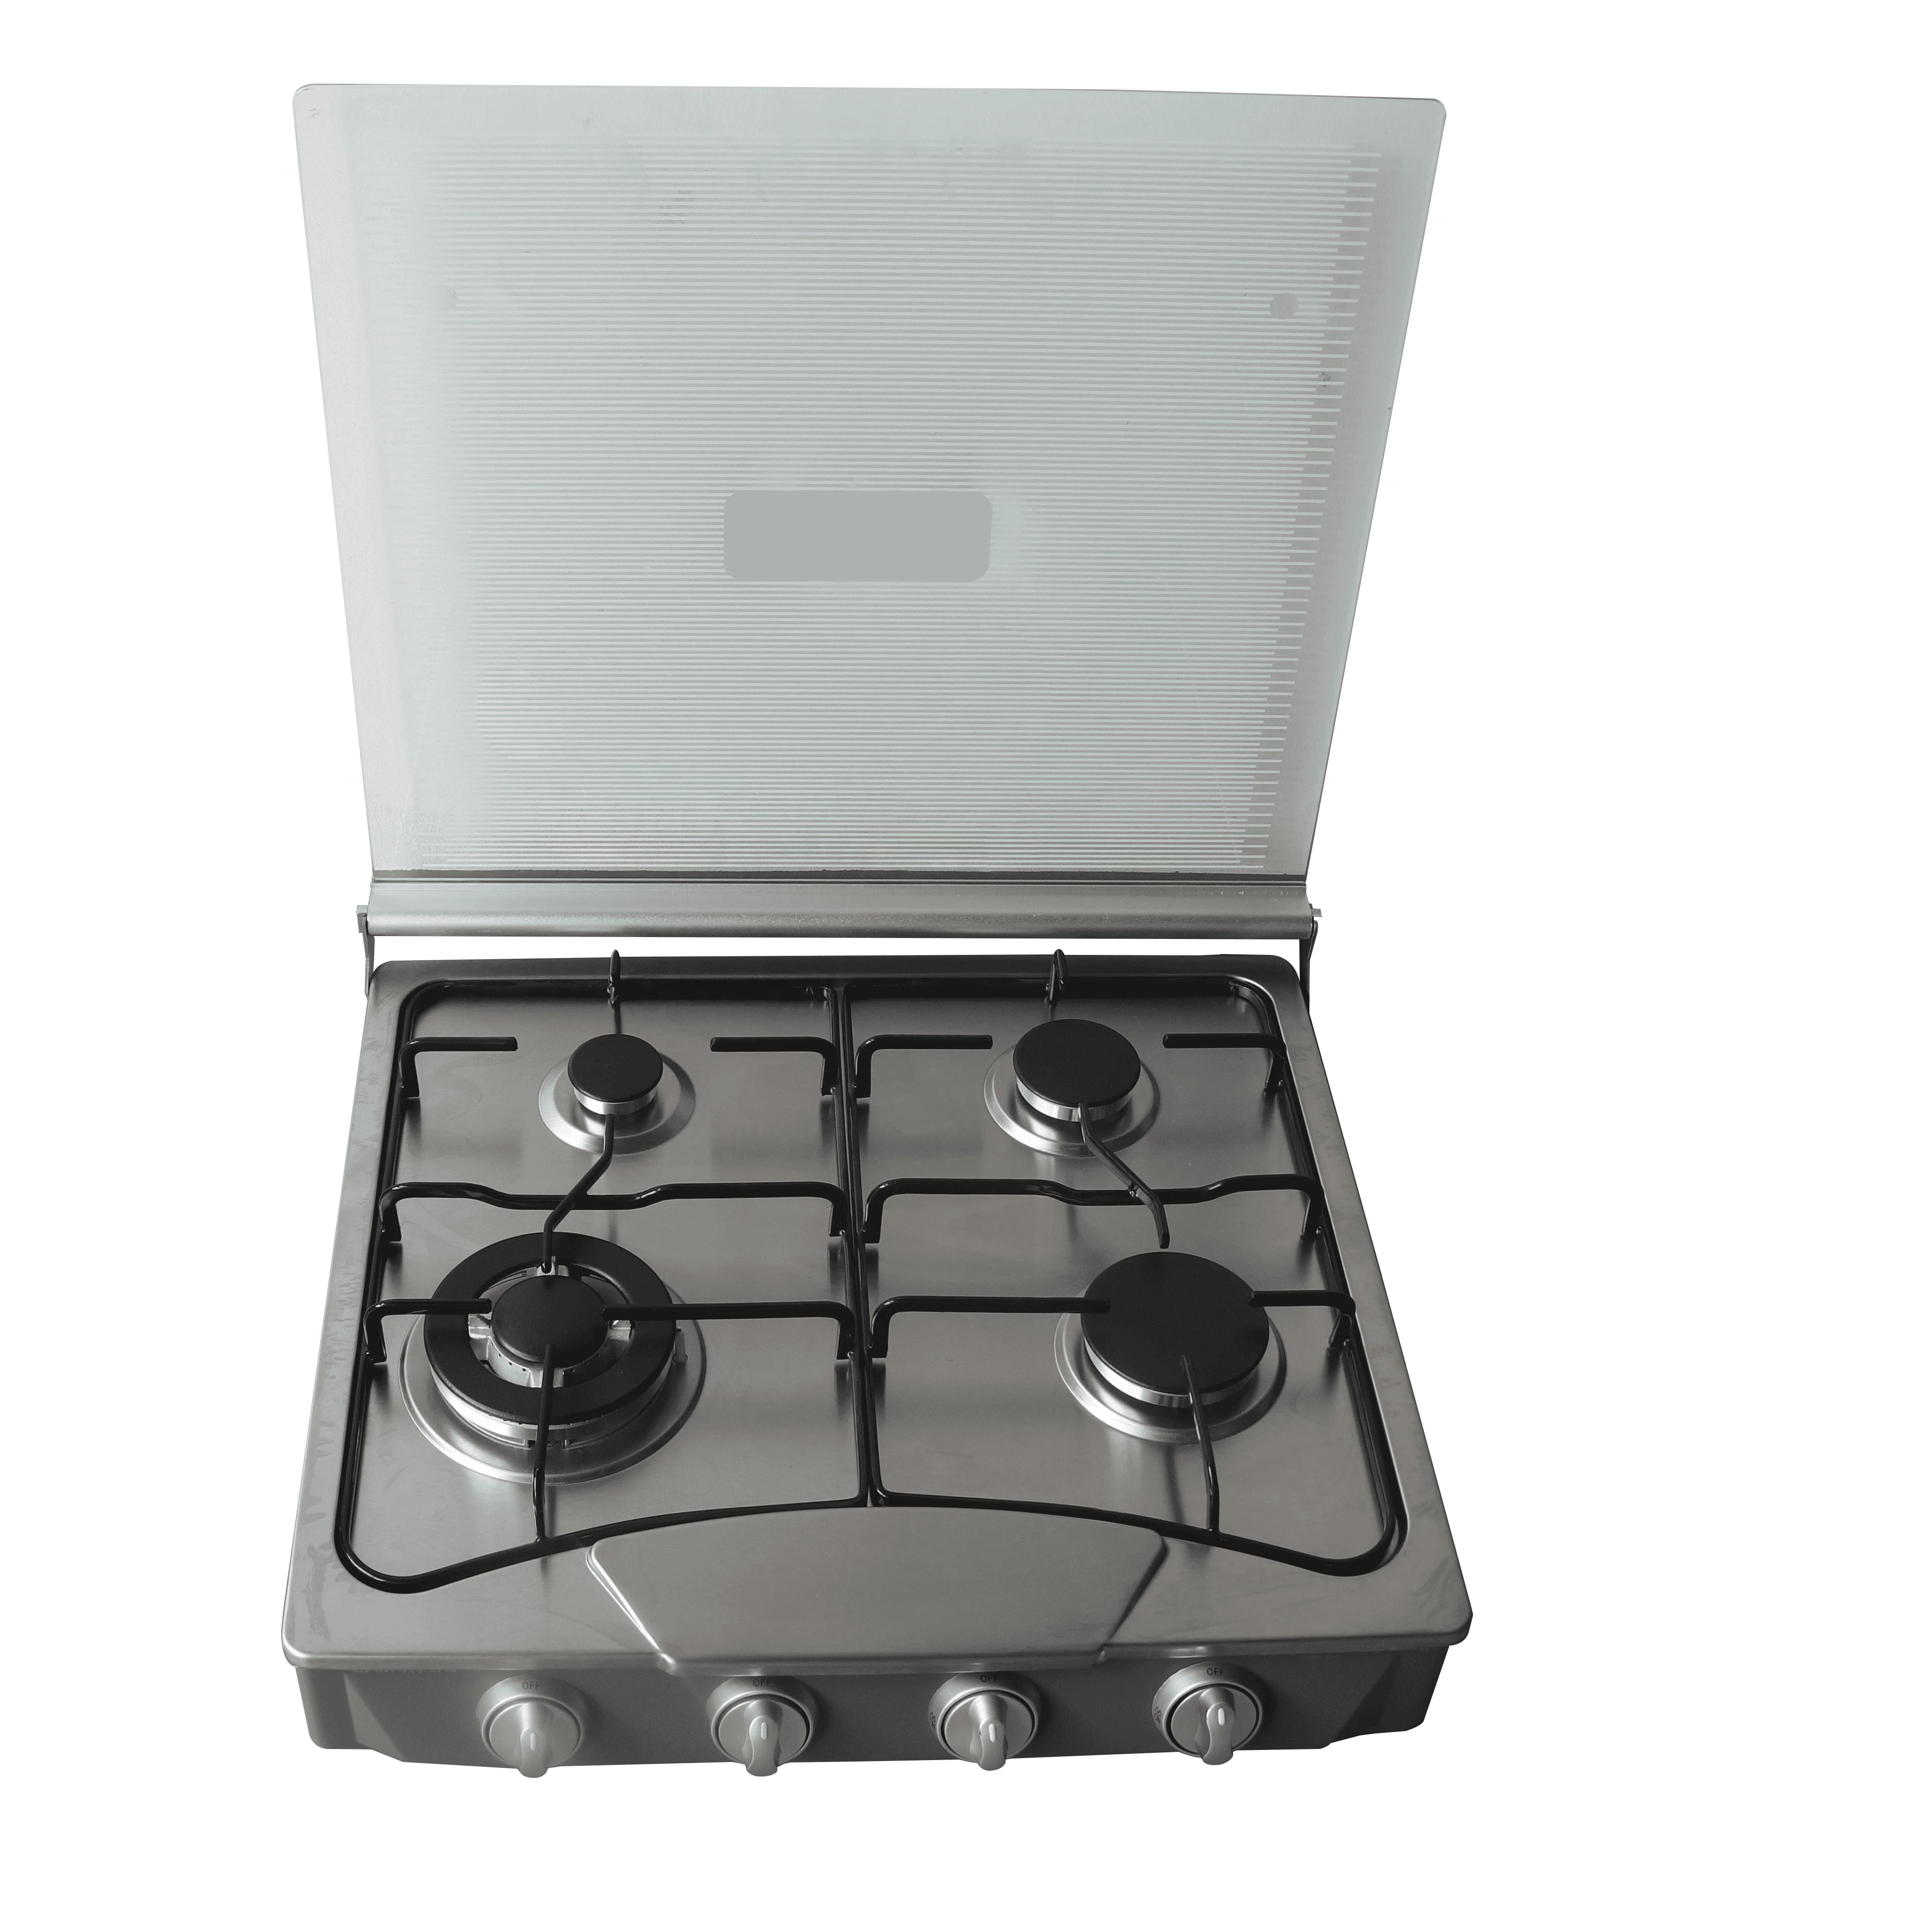 KO-410 INOX Gas Operated Tabletop Cooker / Product Info